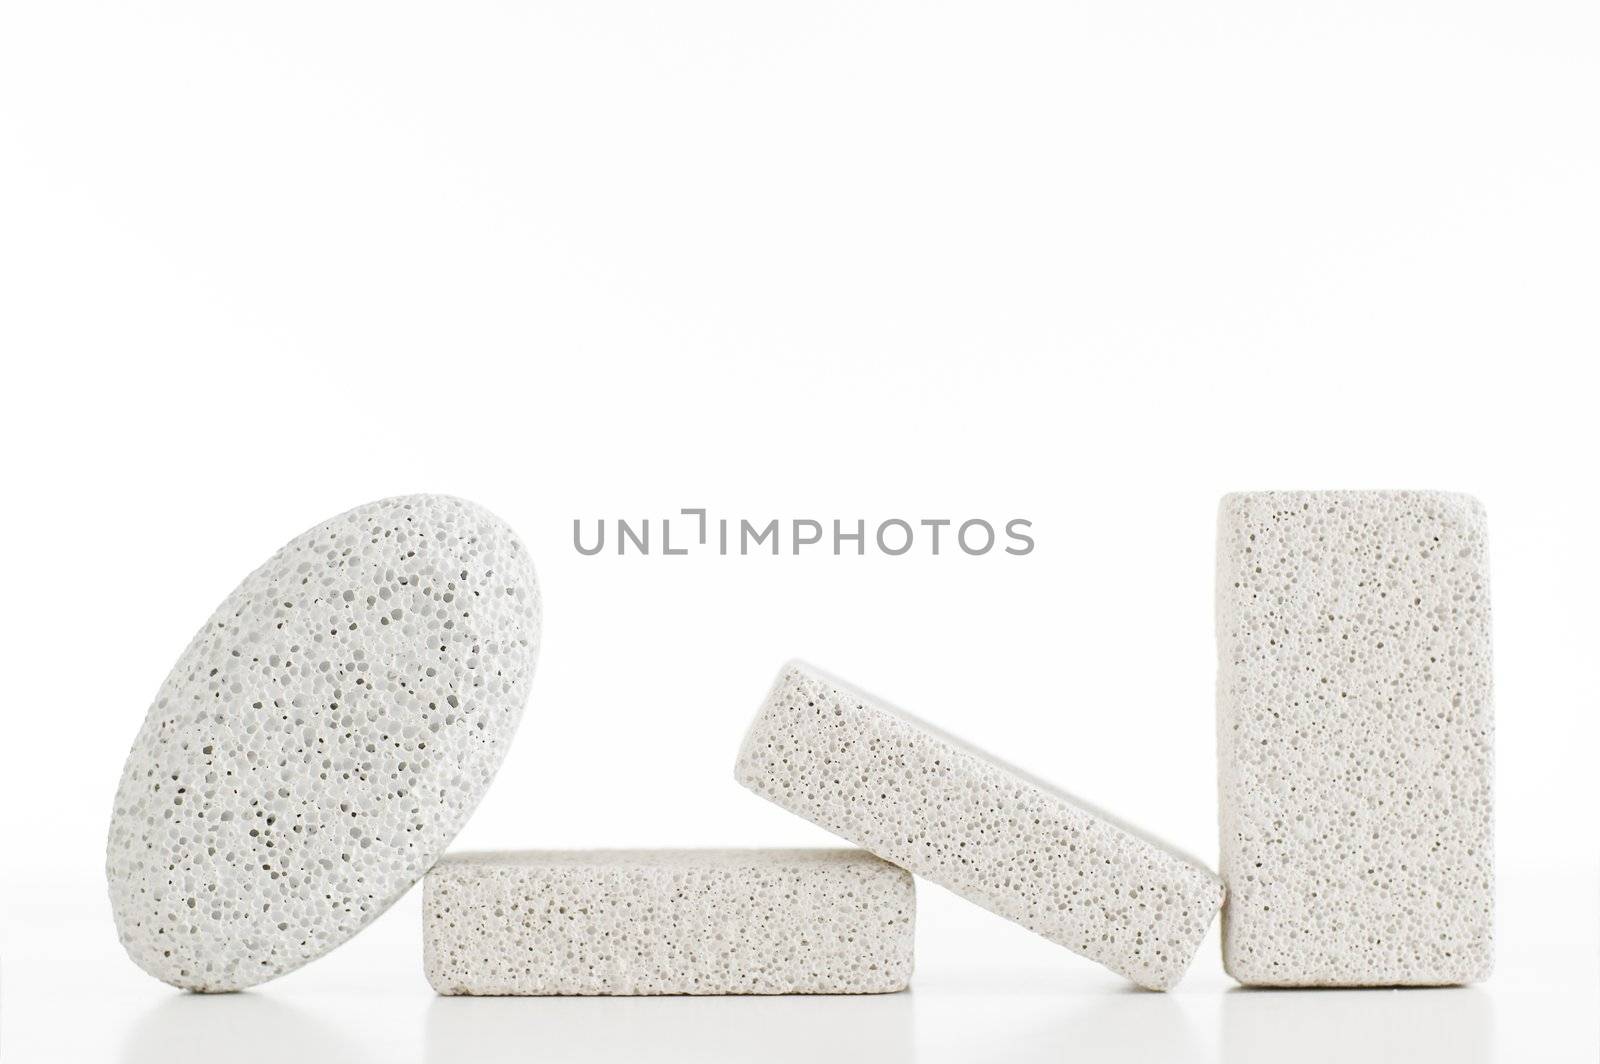 Pumice stones against a white background, sleight reflection.